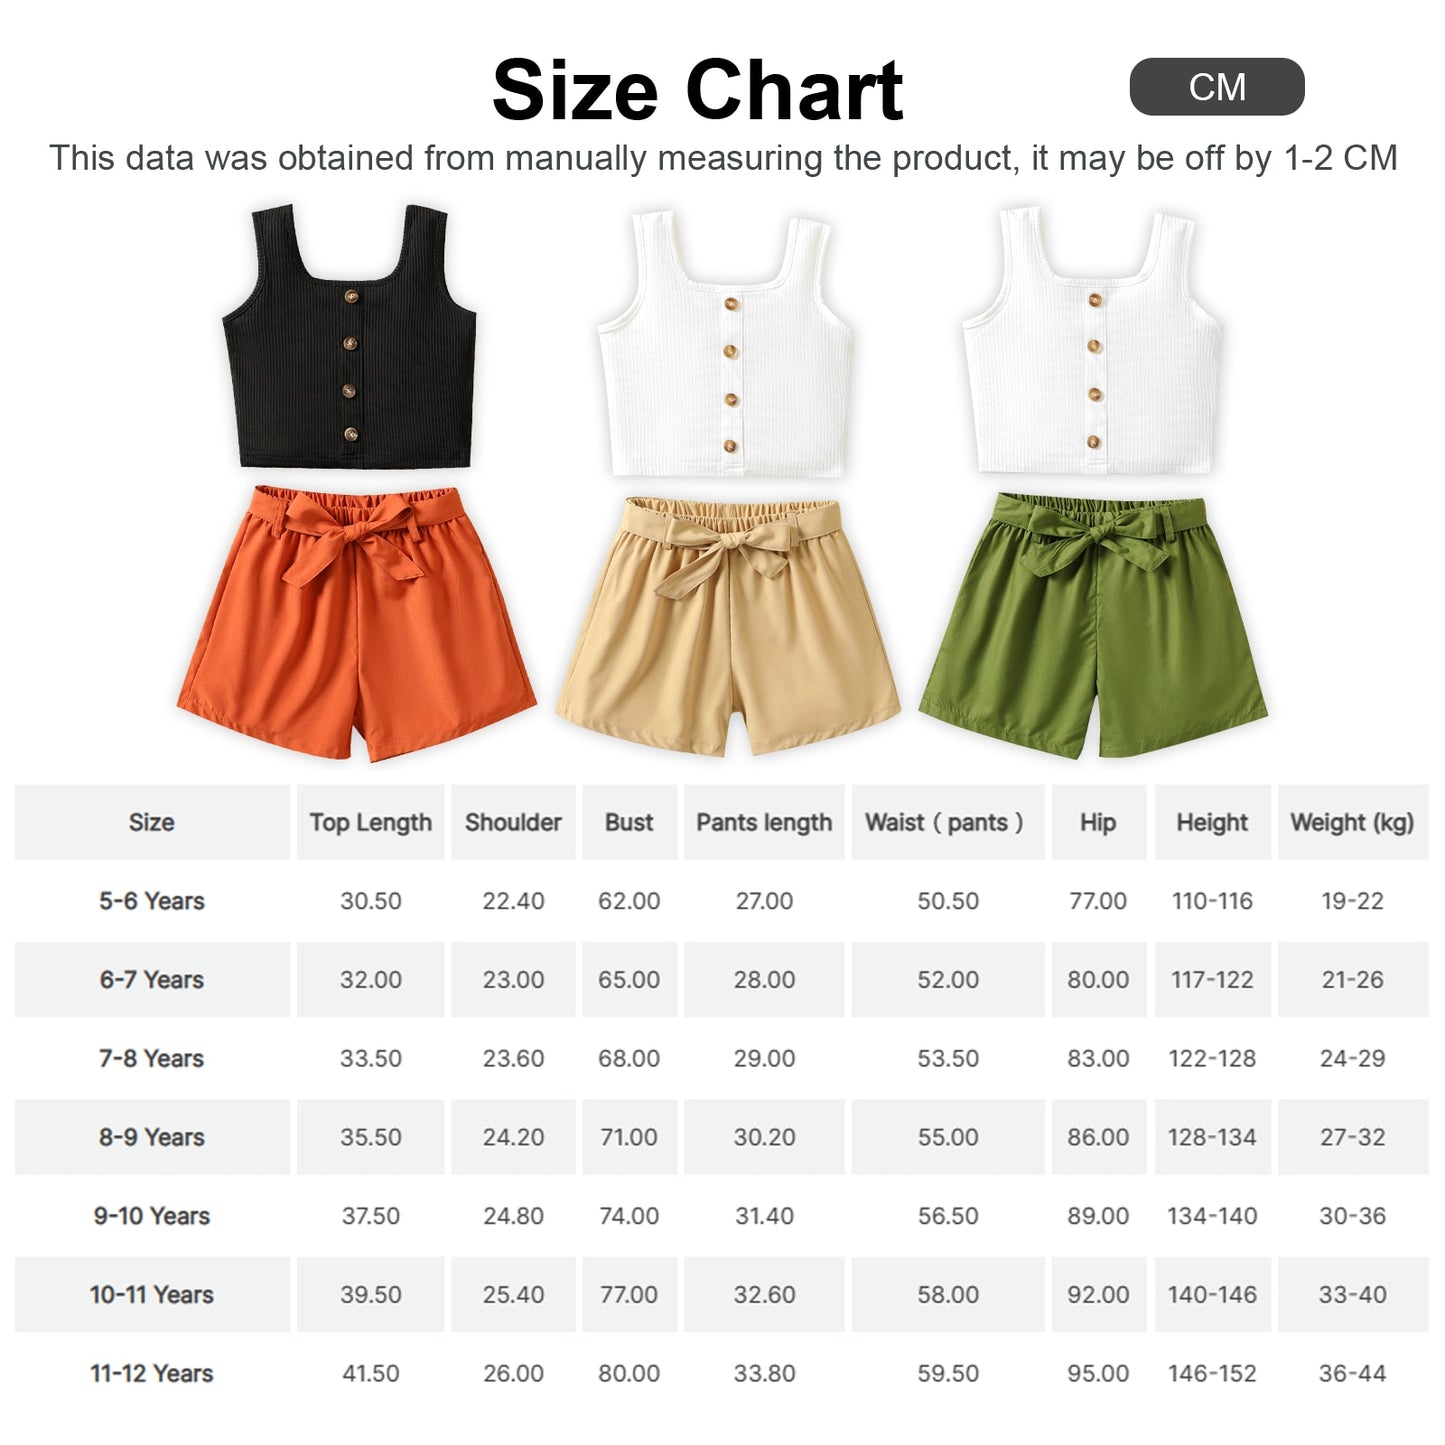 2 Piece Kids Girls' Button Ribbed Tank Top and Belted Shorts Set The Clothing Company Sydney